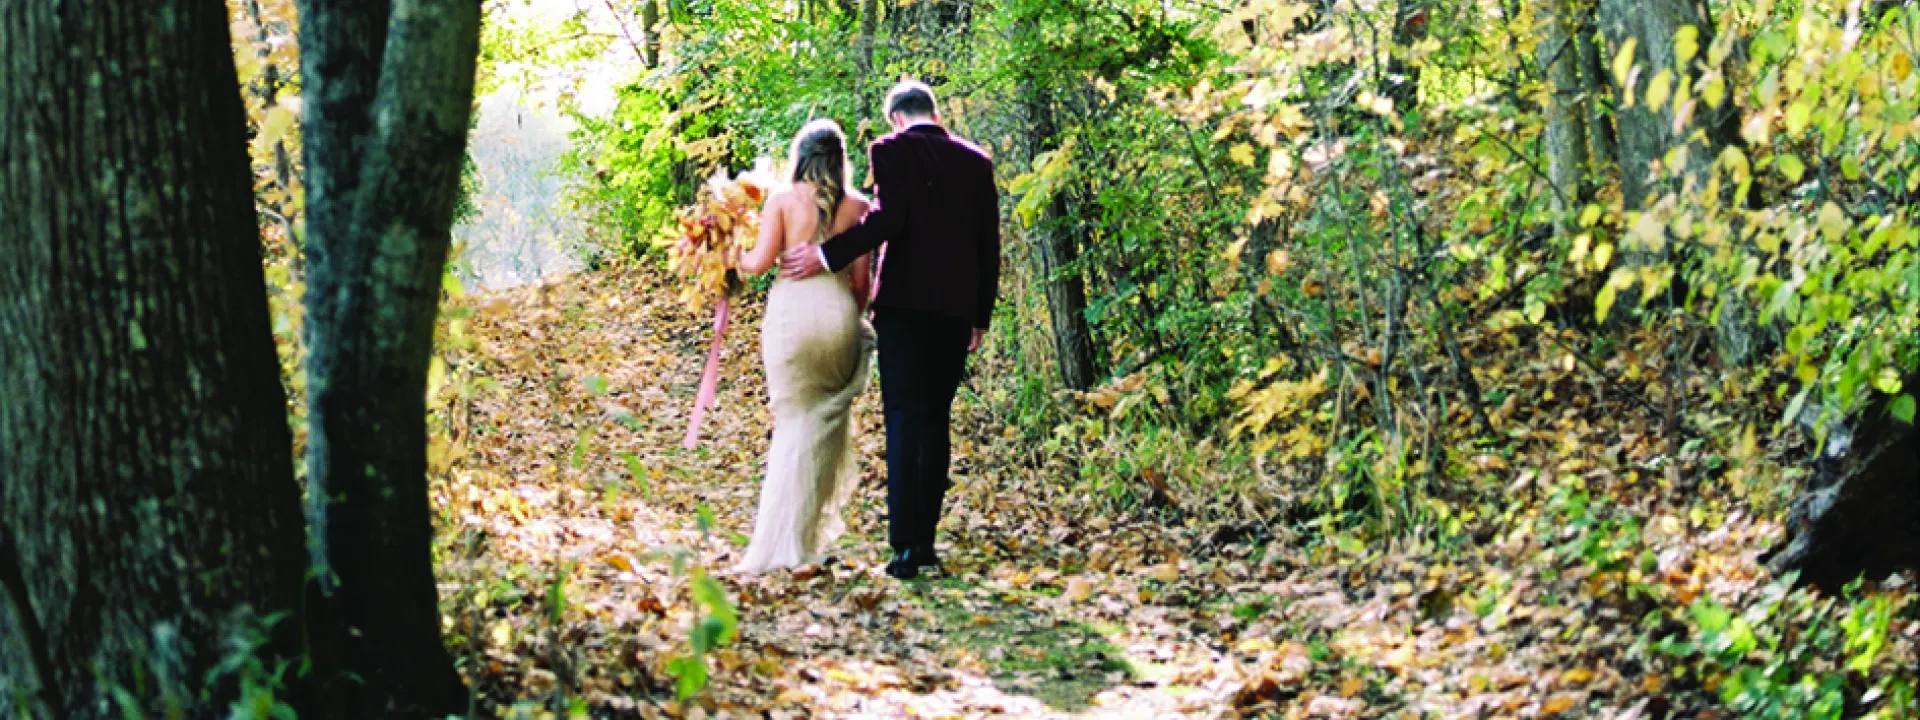 A bride and groom walk a path at the golden hour. His burgundy suit and her neutral wedding dress complement the fall wedding theme.